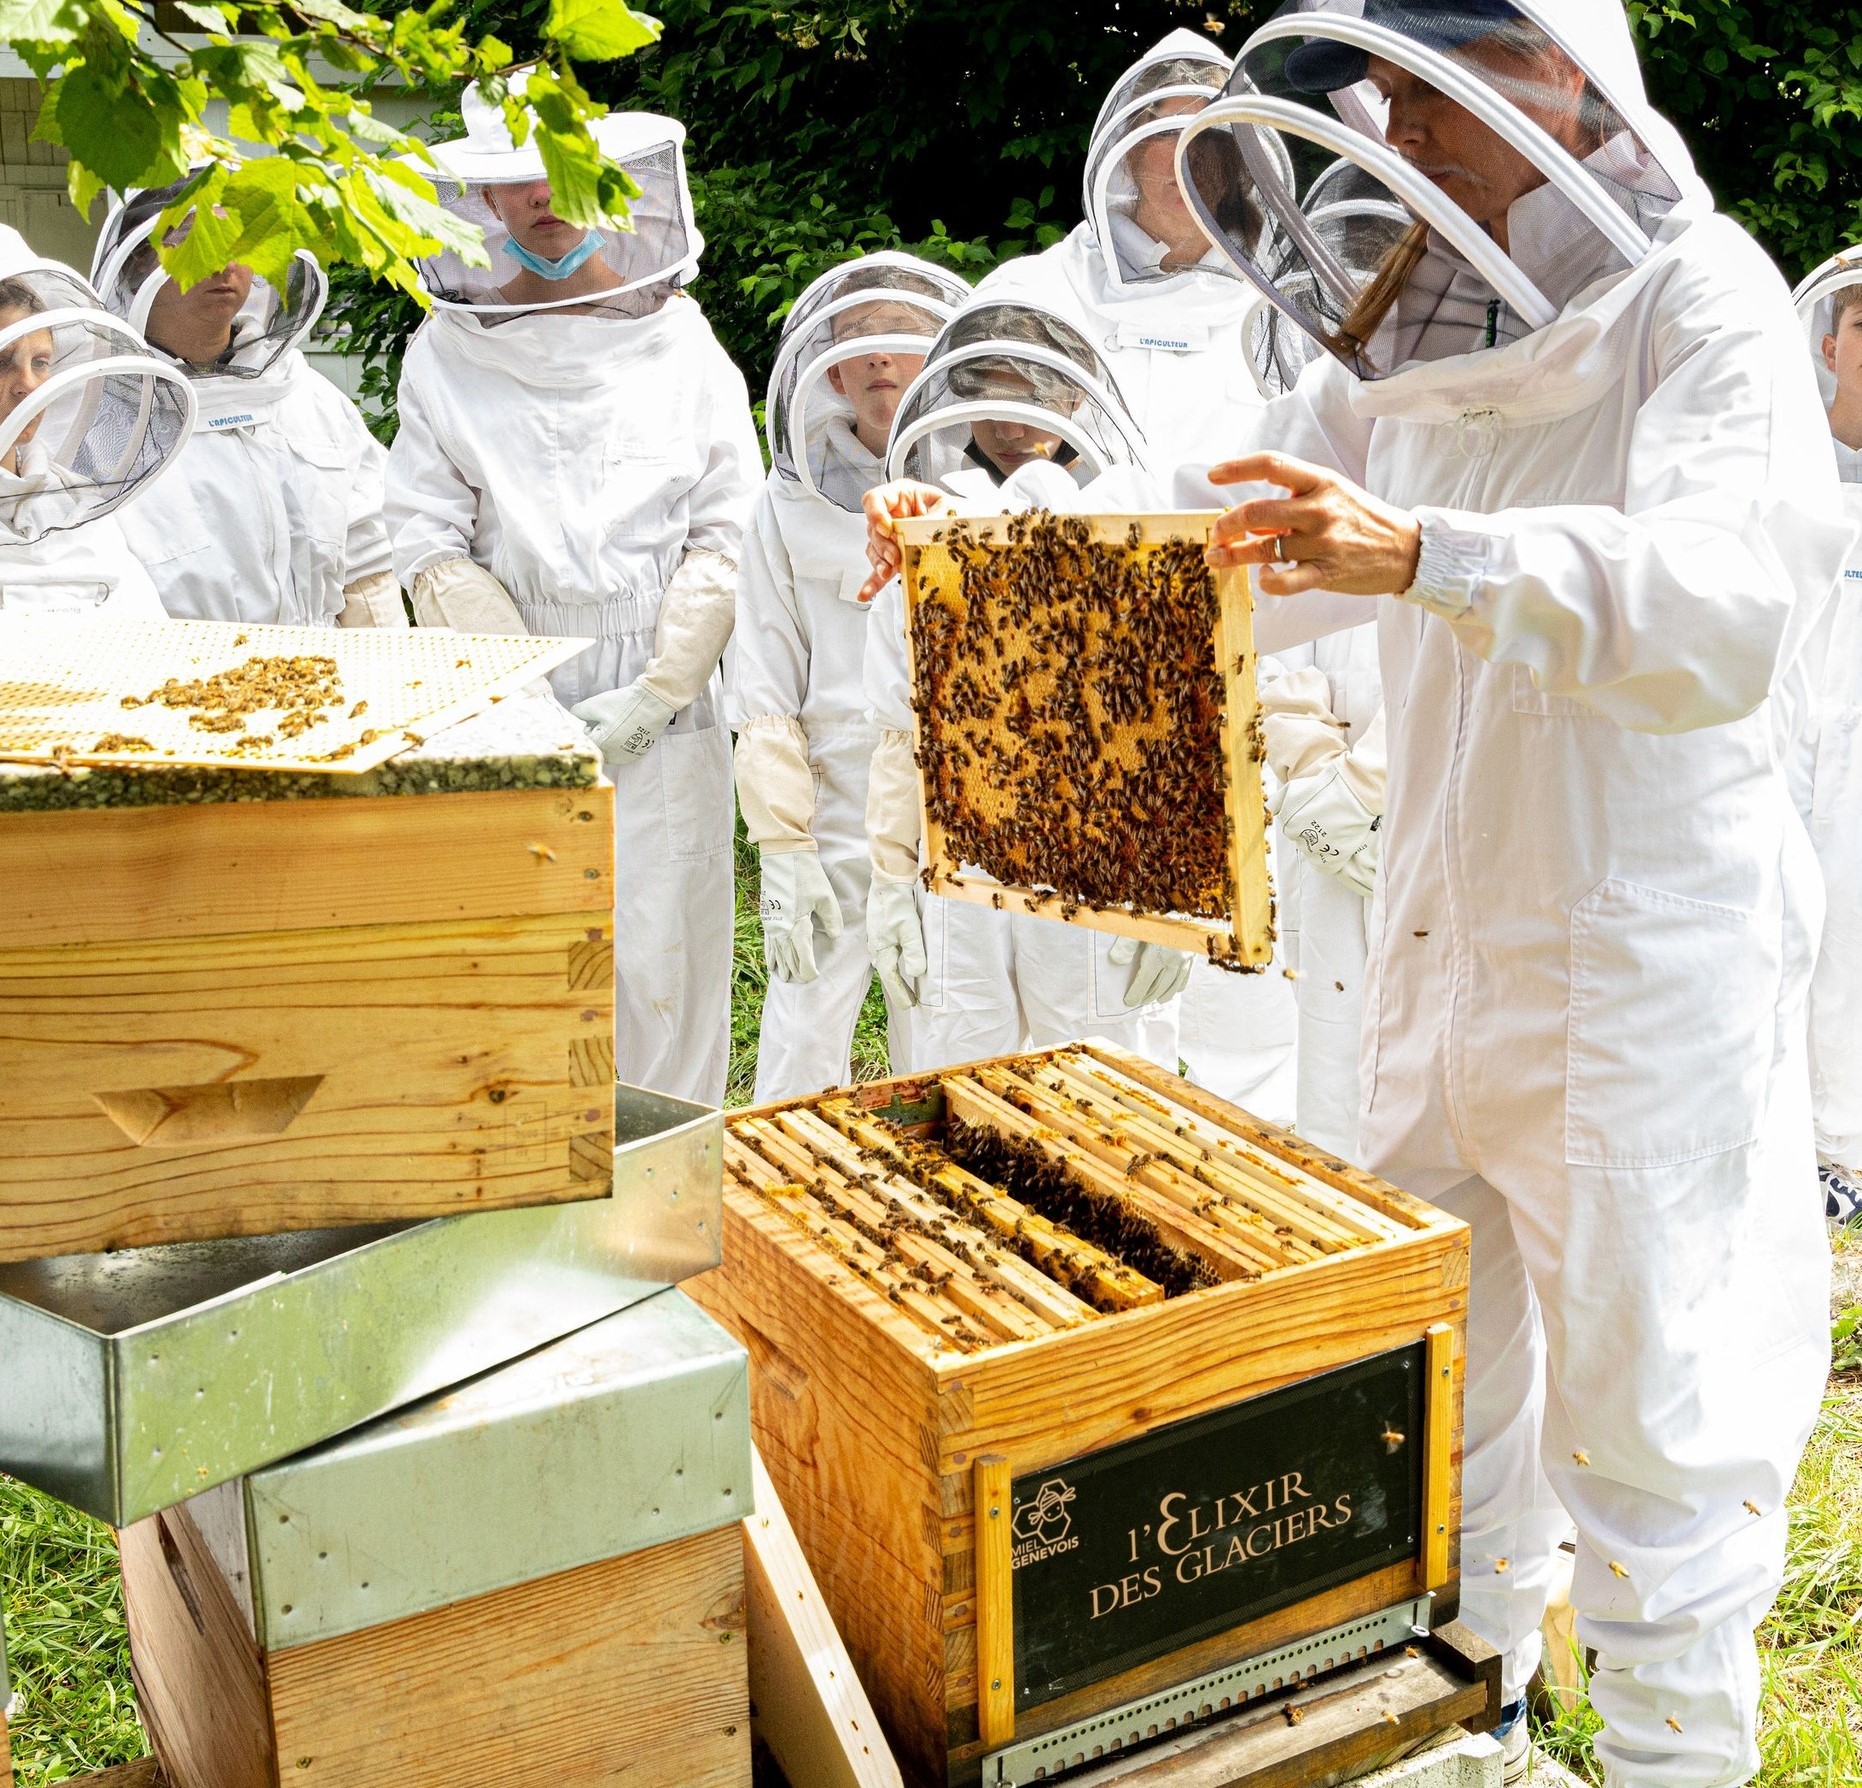 Geneva-based beekeeper and head of the Arche des Abeilles Foundation